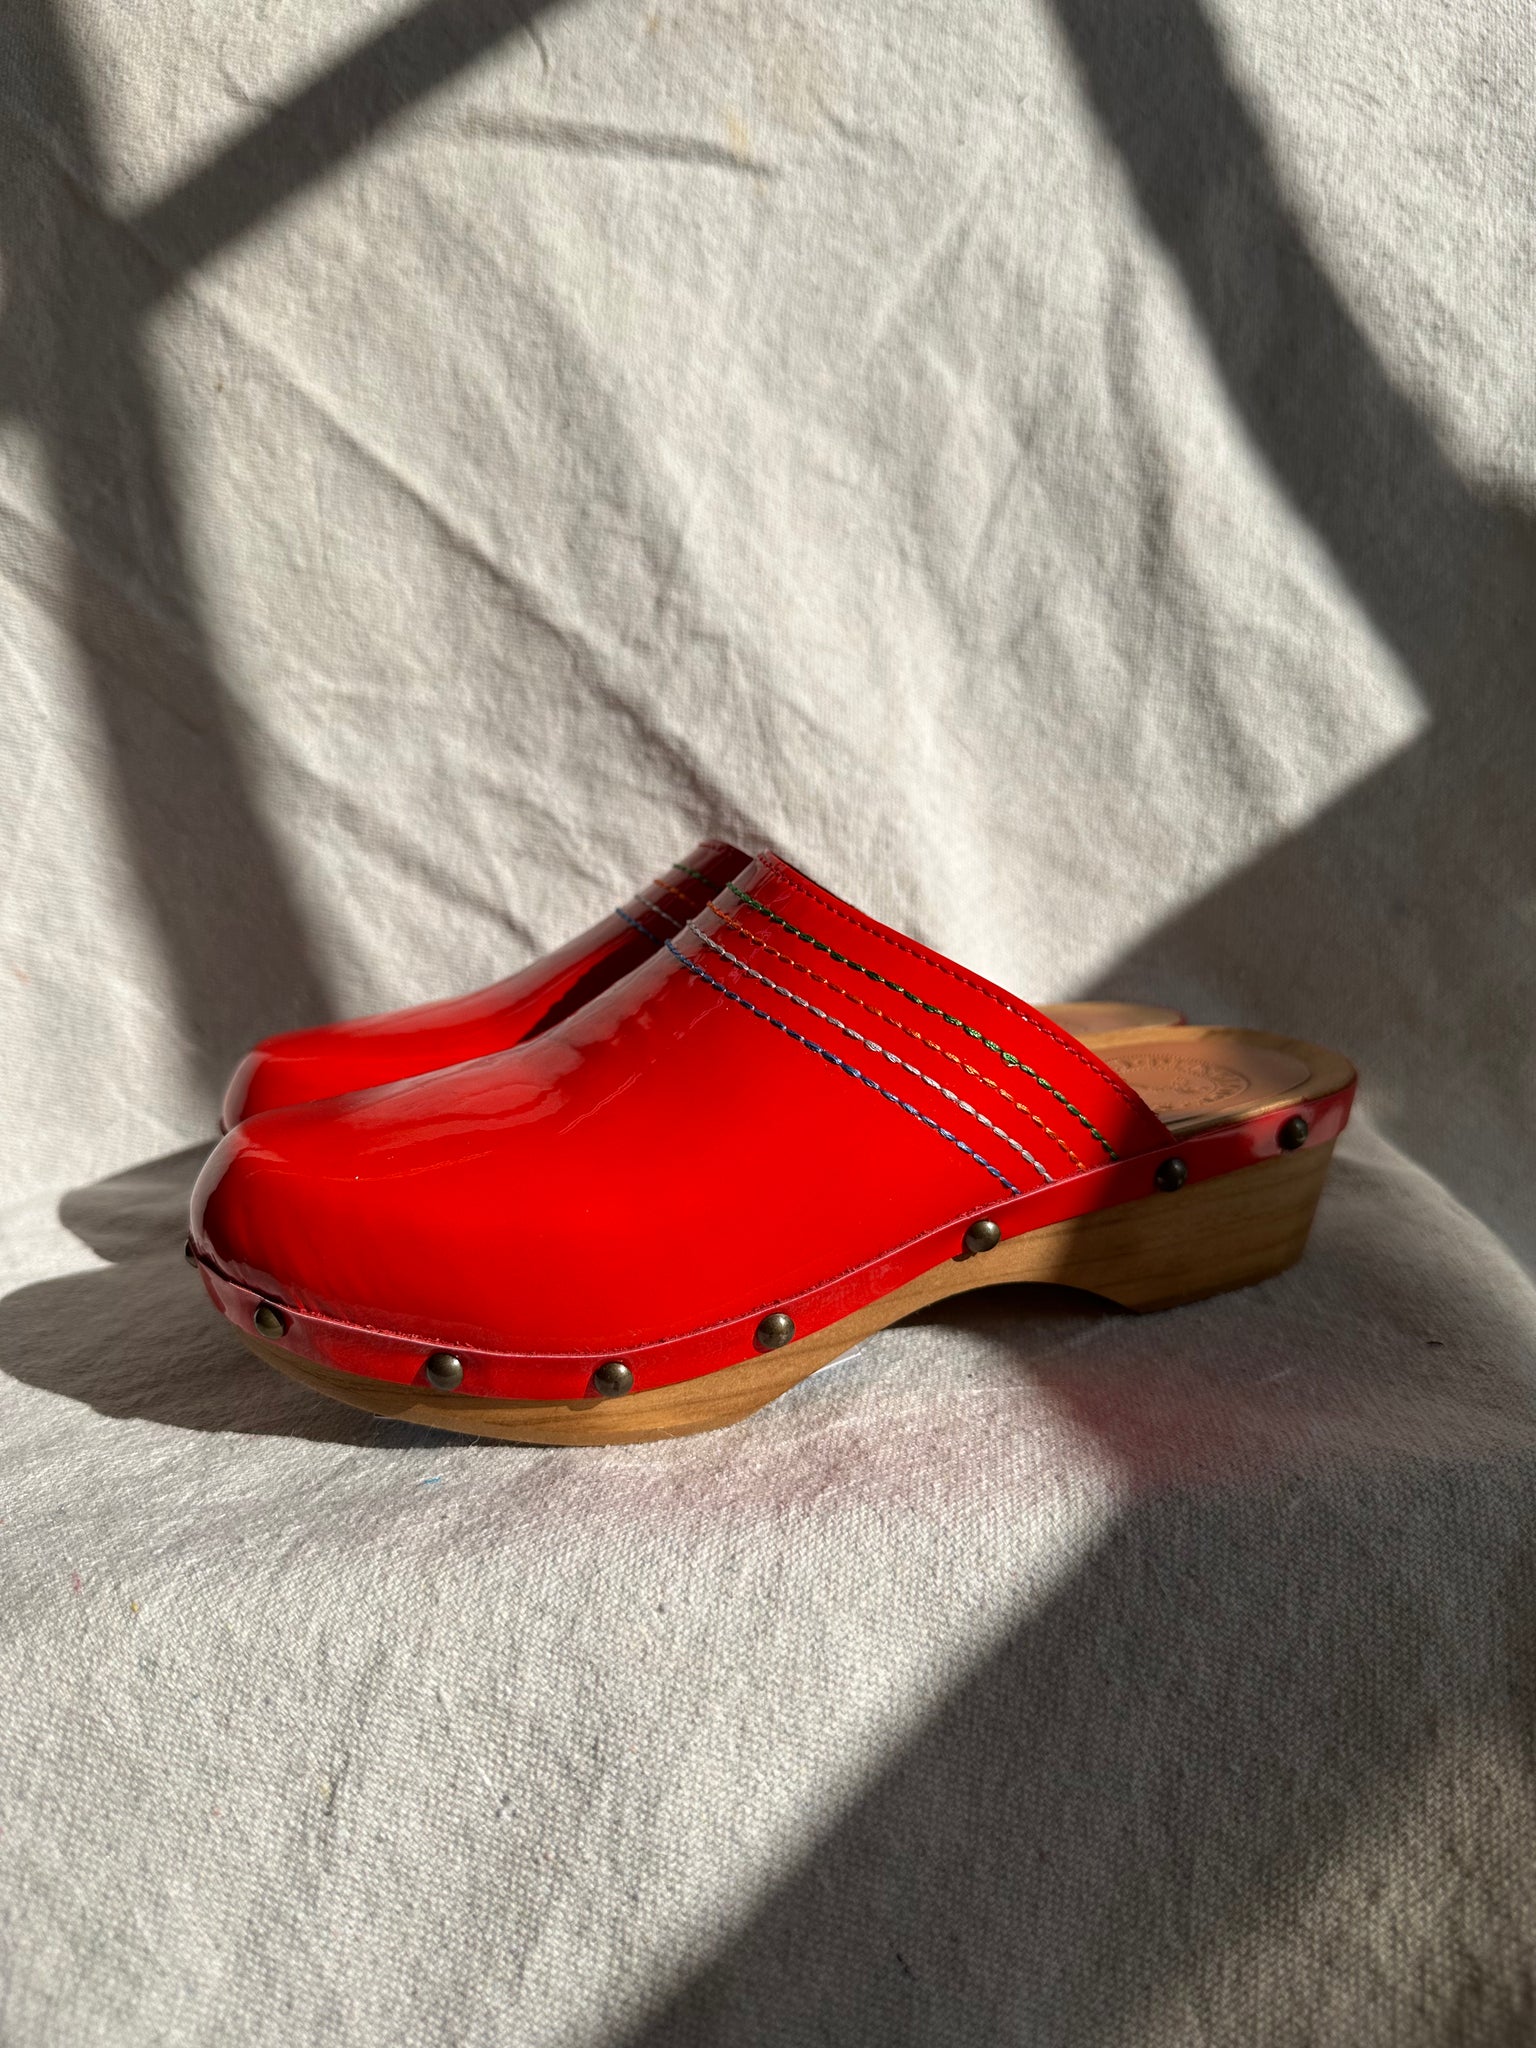 Penelope Chilvers red clog